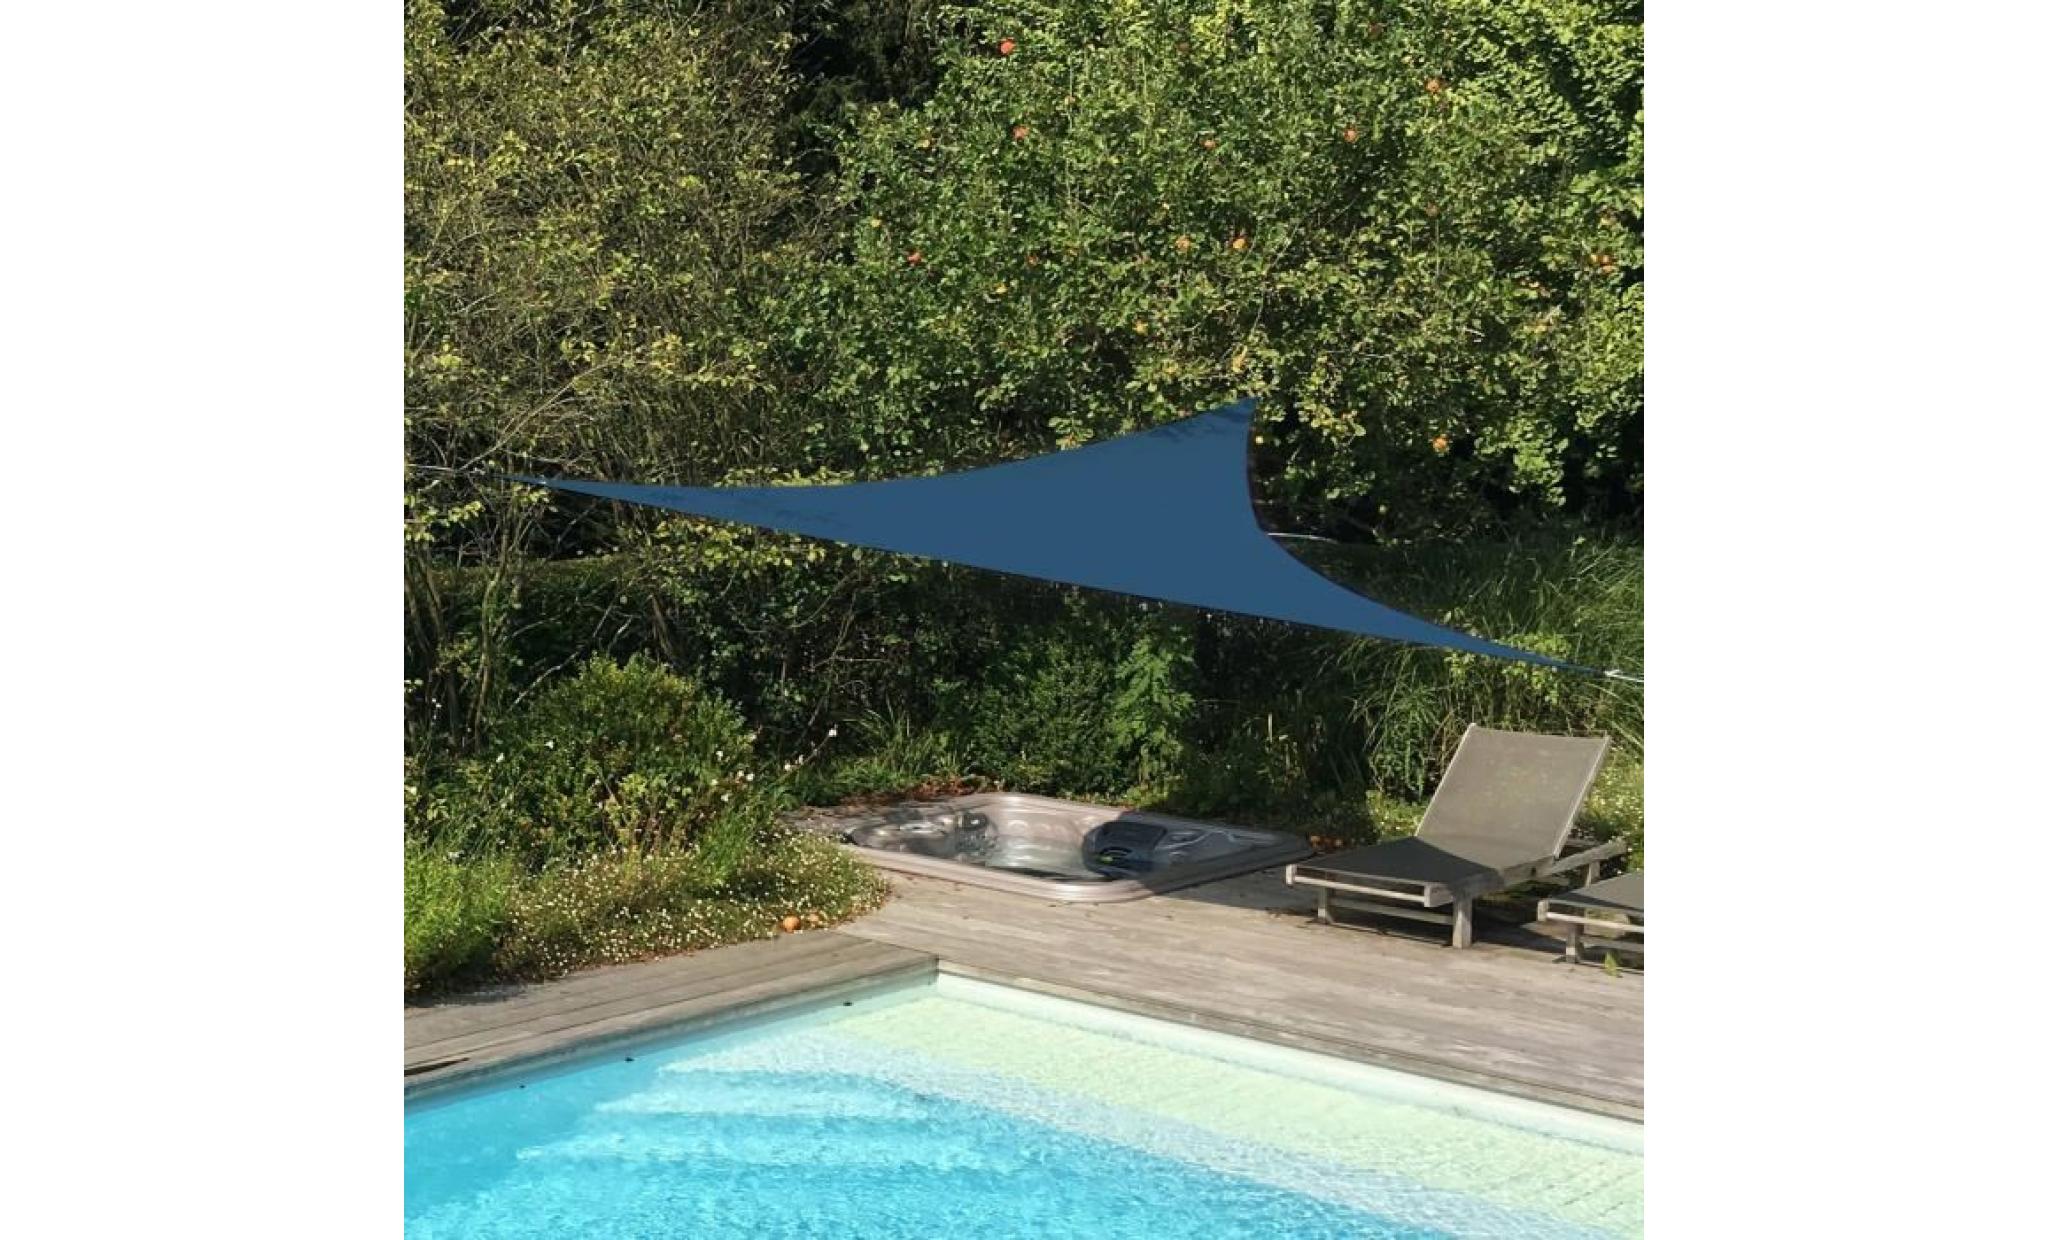 voile d’ombrage triangulaire extensible easywind 3,6 x 3,6 x 3,6m   vert   anti uv upf 50+ pas cher